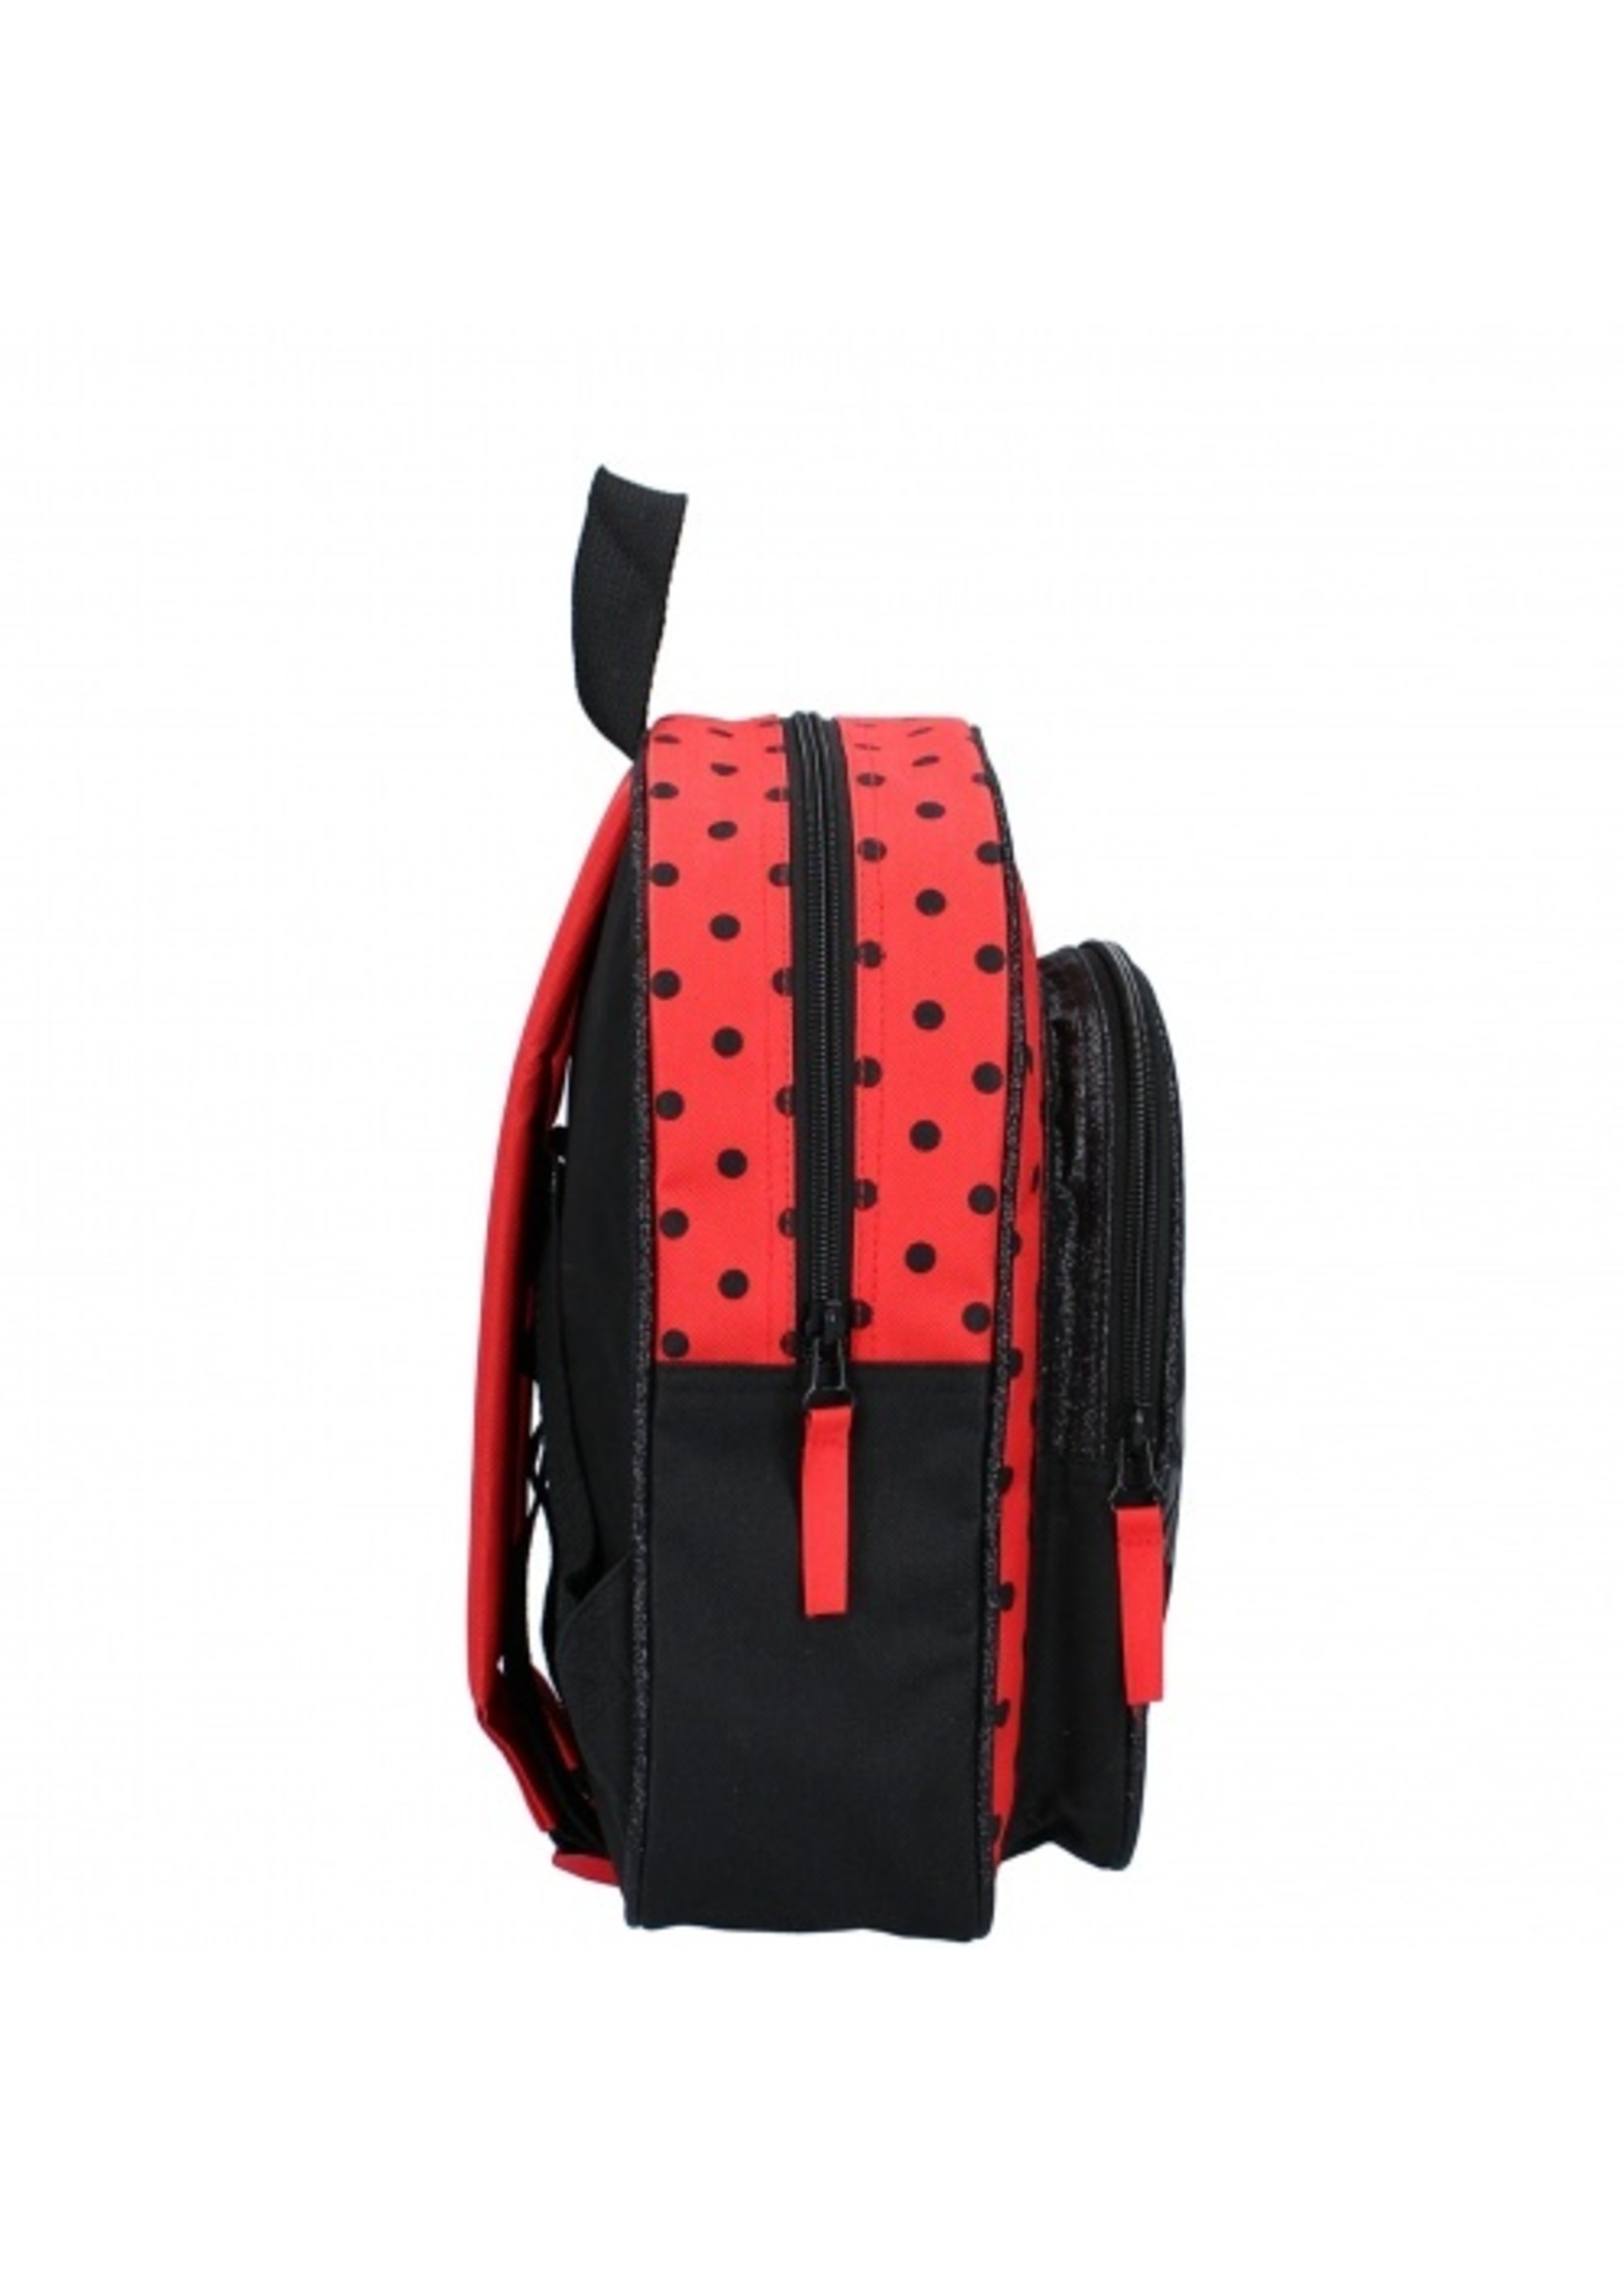 Miraculous Ladybug backpack from Miraculous